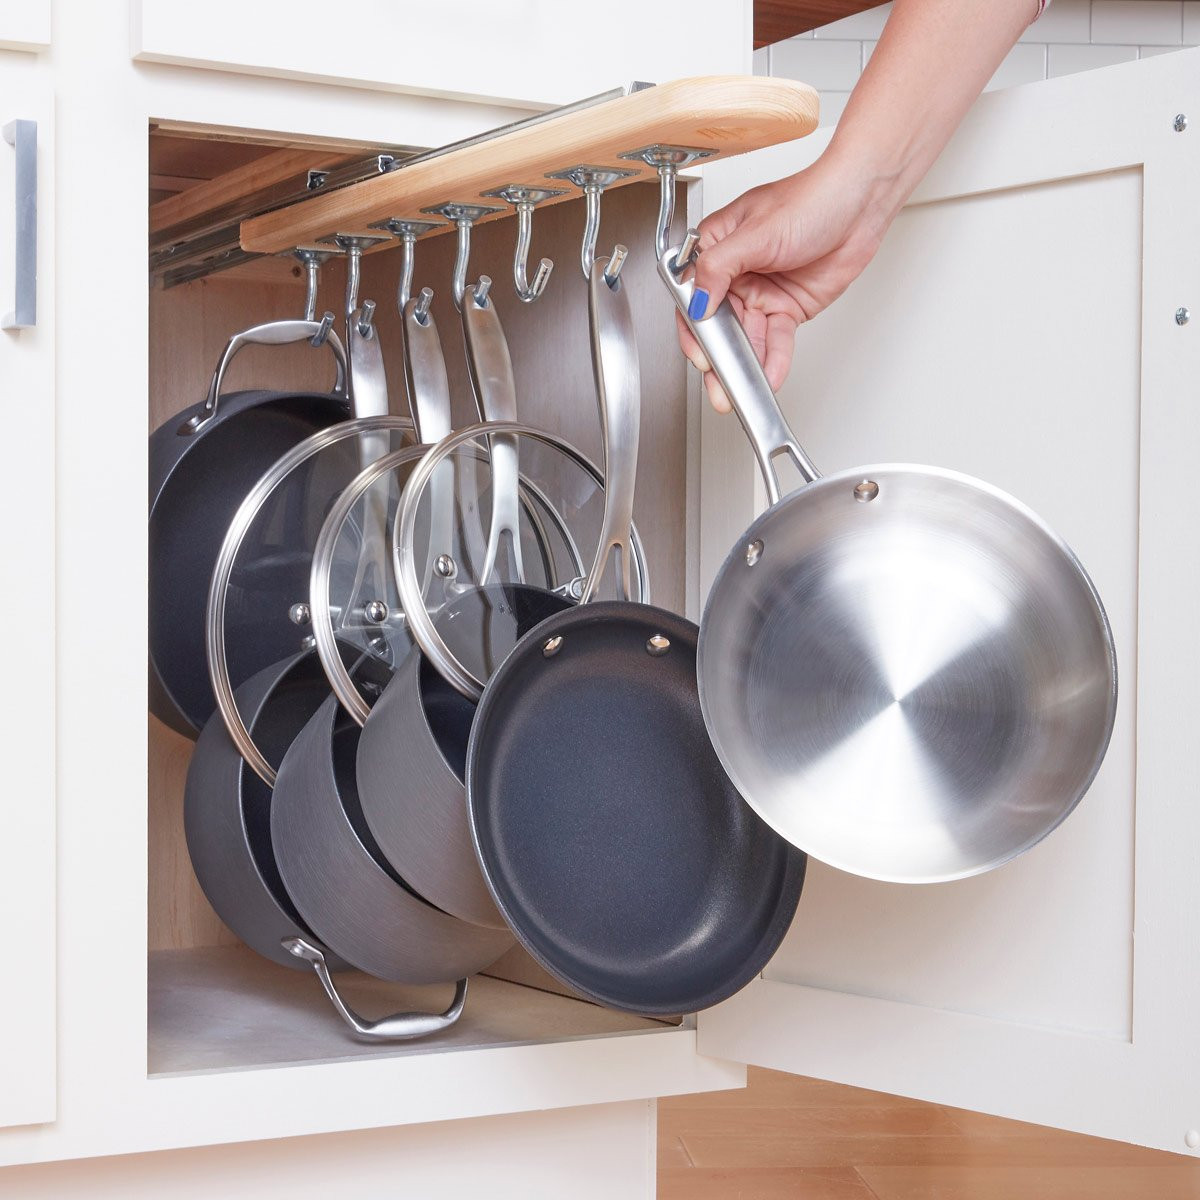 DIY Pots And Pans Organizer
 Kitchen Cabinet Storage Solutions DIY Pot and Pan Pullout